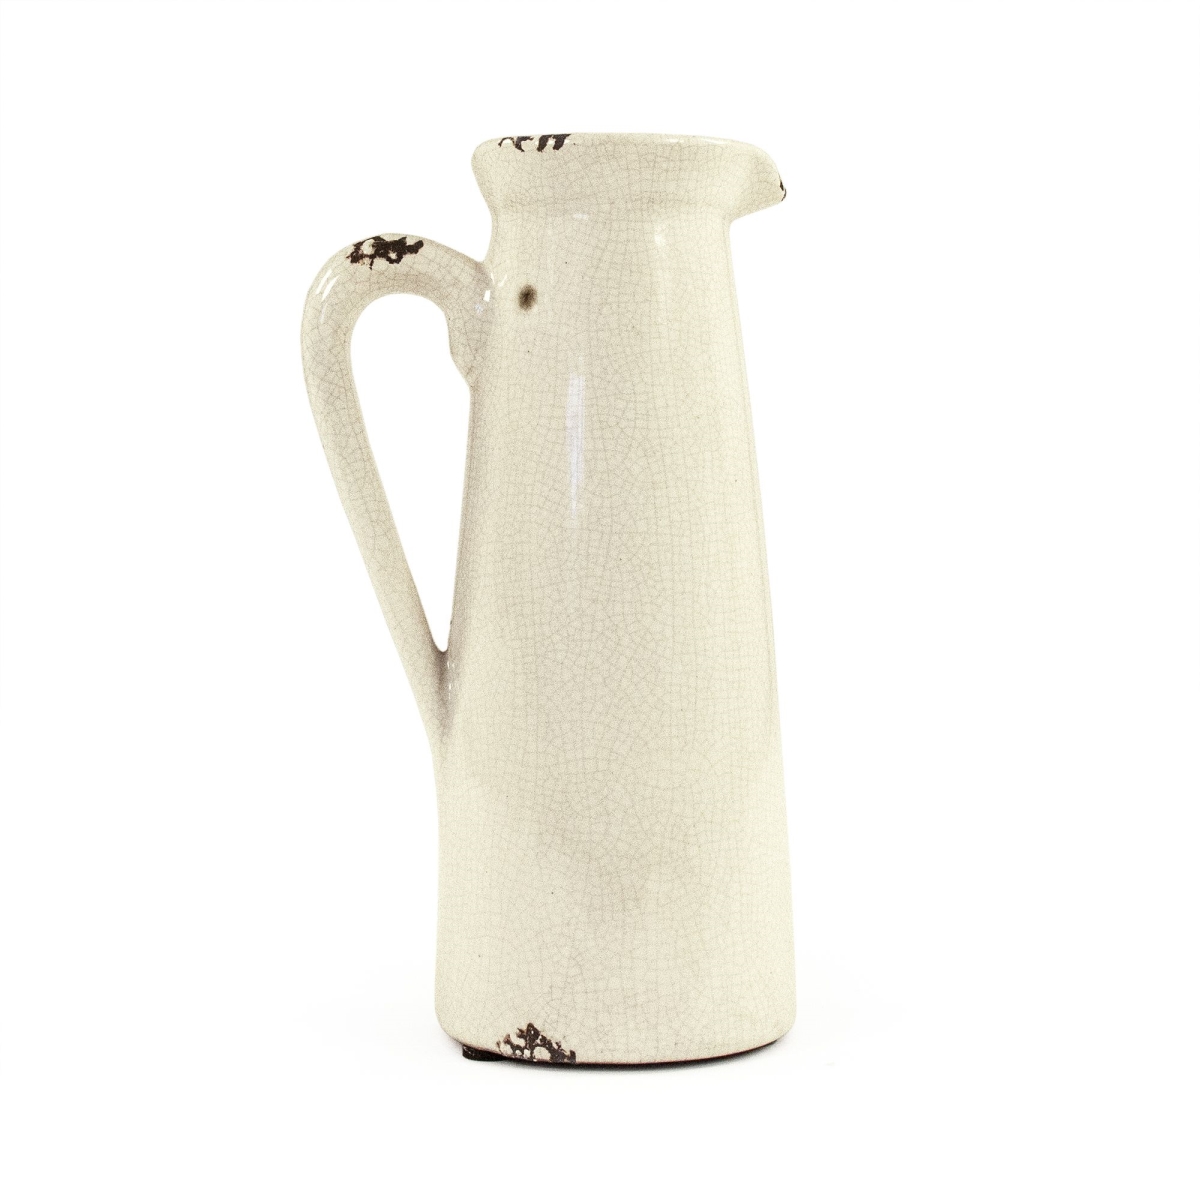 Picture of Zentique 015659 A369 Distressed Crackle White Ceramic Pitcher - Small